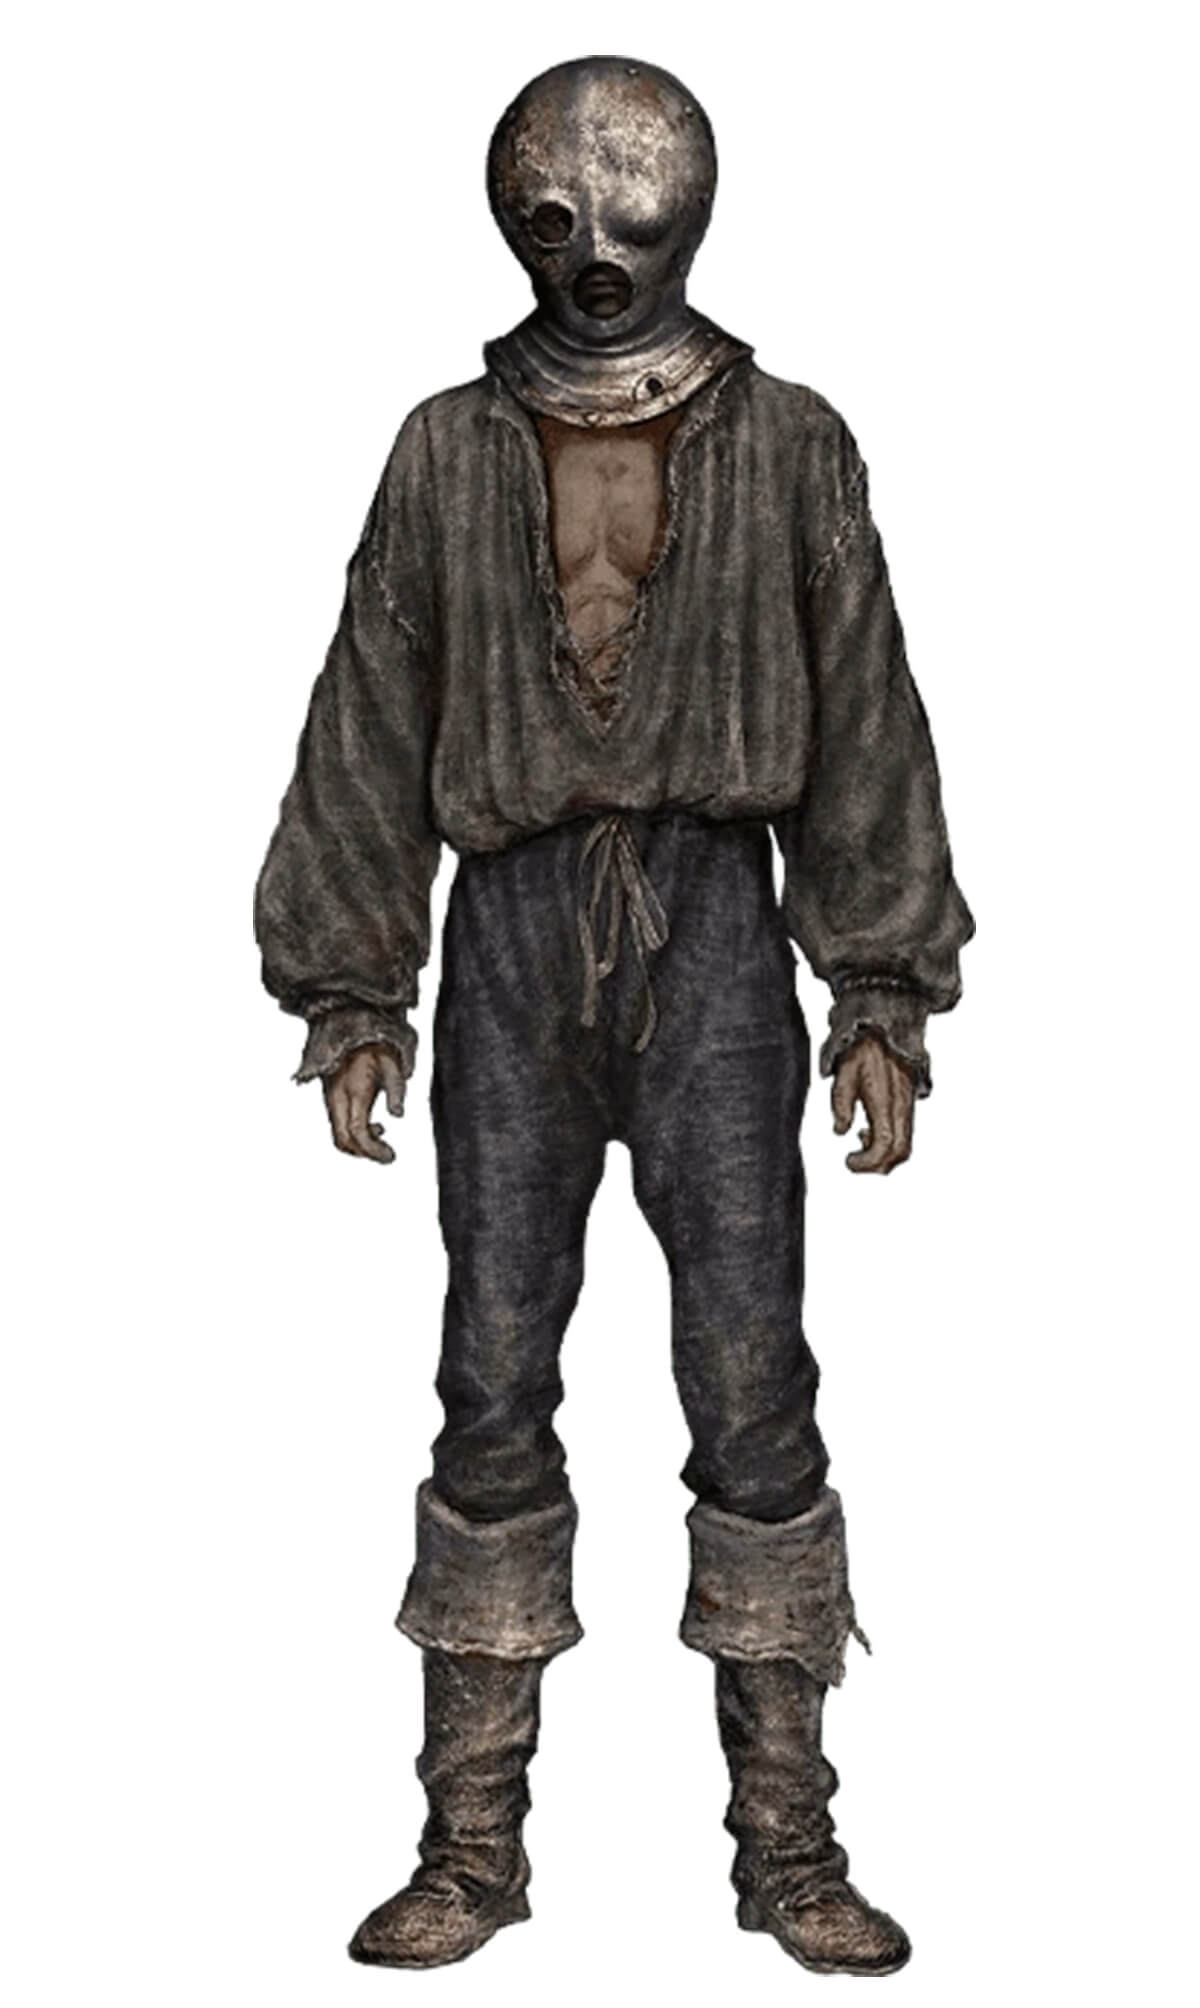 A man in a raggedy blouse, pants, and boots, wearing an iron prison mask.